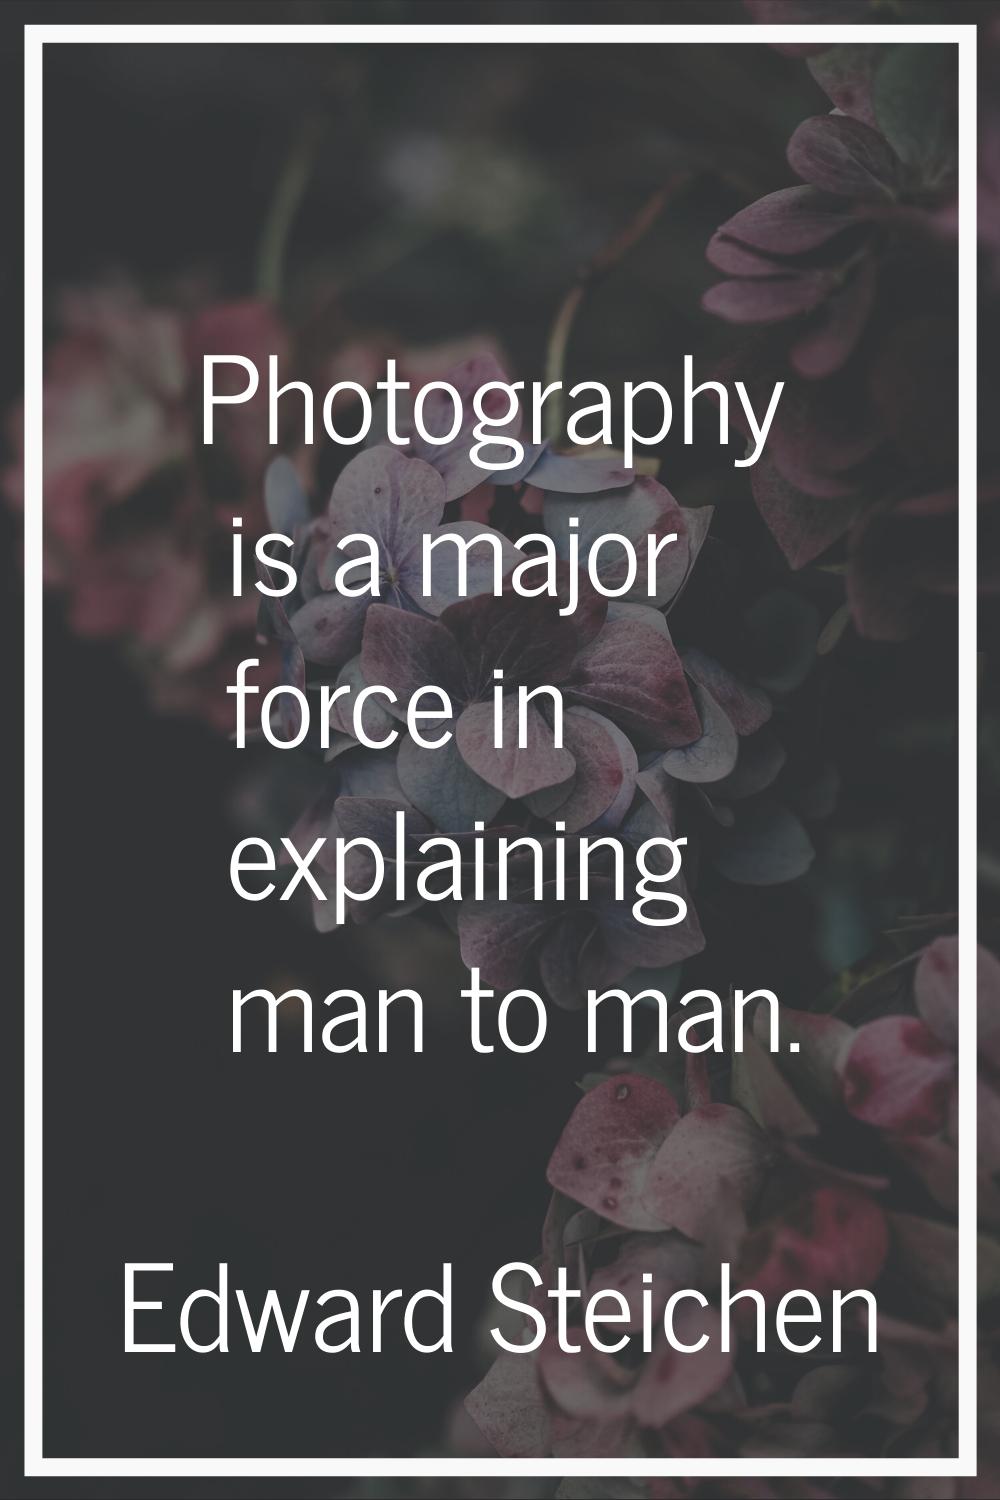 Photography is a major force in explaining man to man.